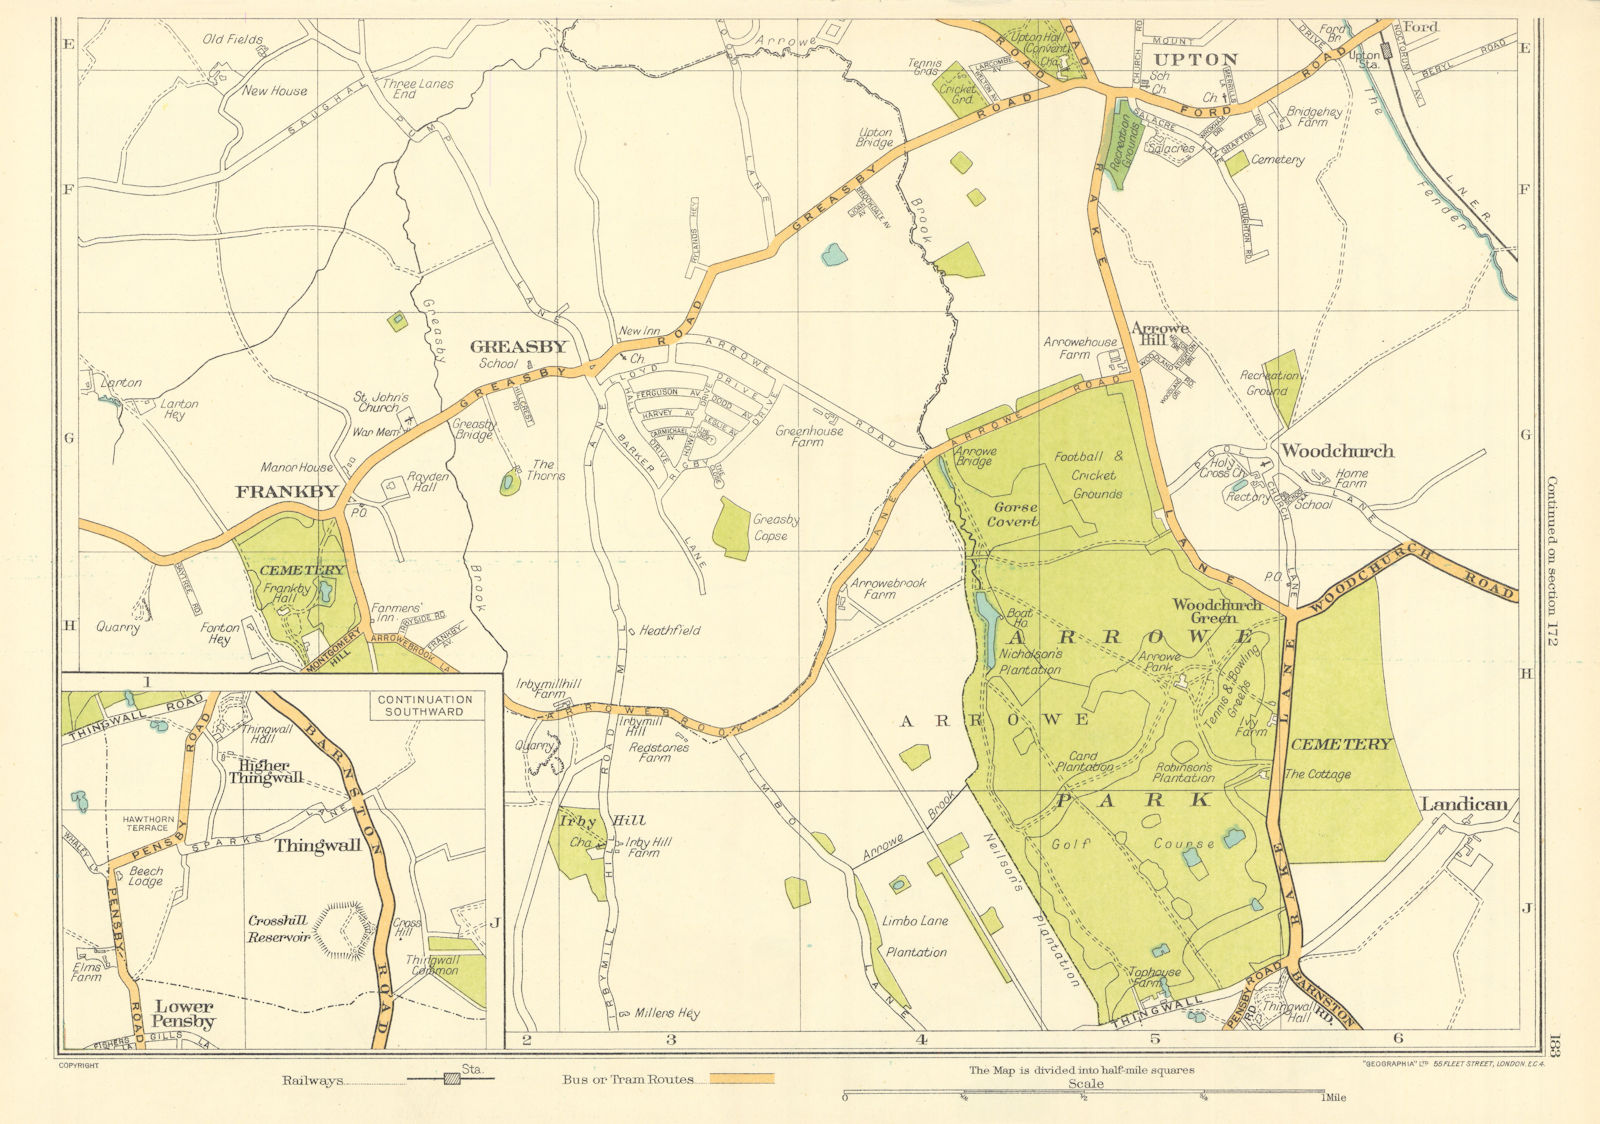 CHESHIRE Greasby Frankby Thingwall Lower Pensby Woodchurch Upton 1935 old map